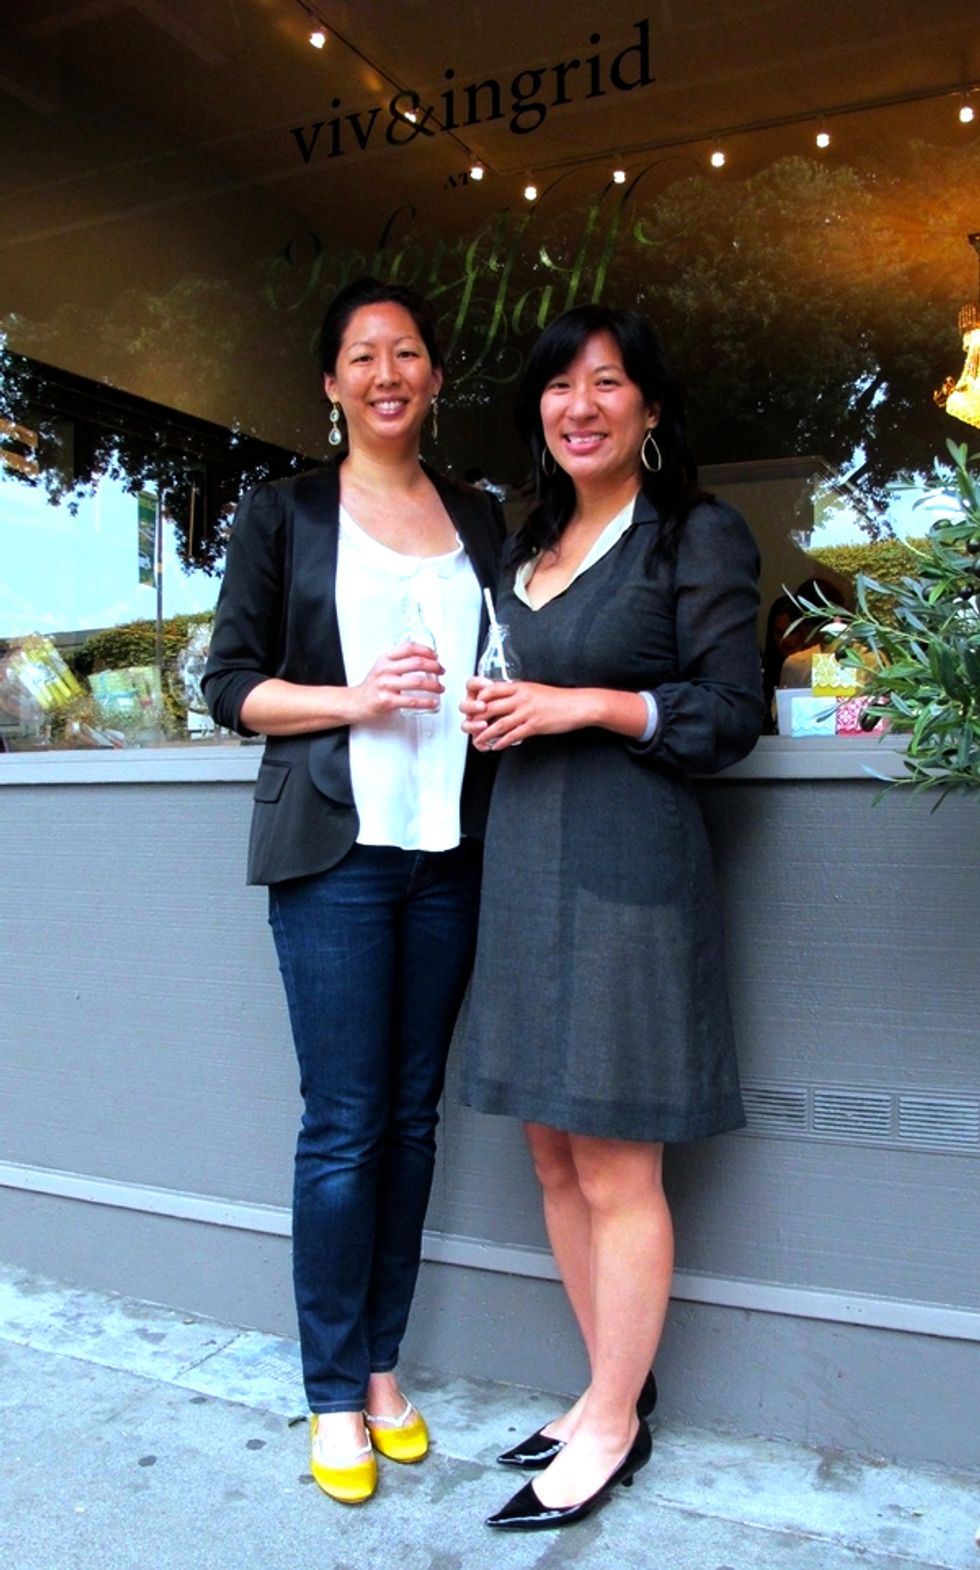 SF Street Style: Local Jewelry Designers Spotted in Simple Pieces + Great Shoes at New Berkeley Boutique, Viv&Ingrid at Oxford Hall